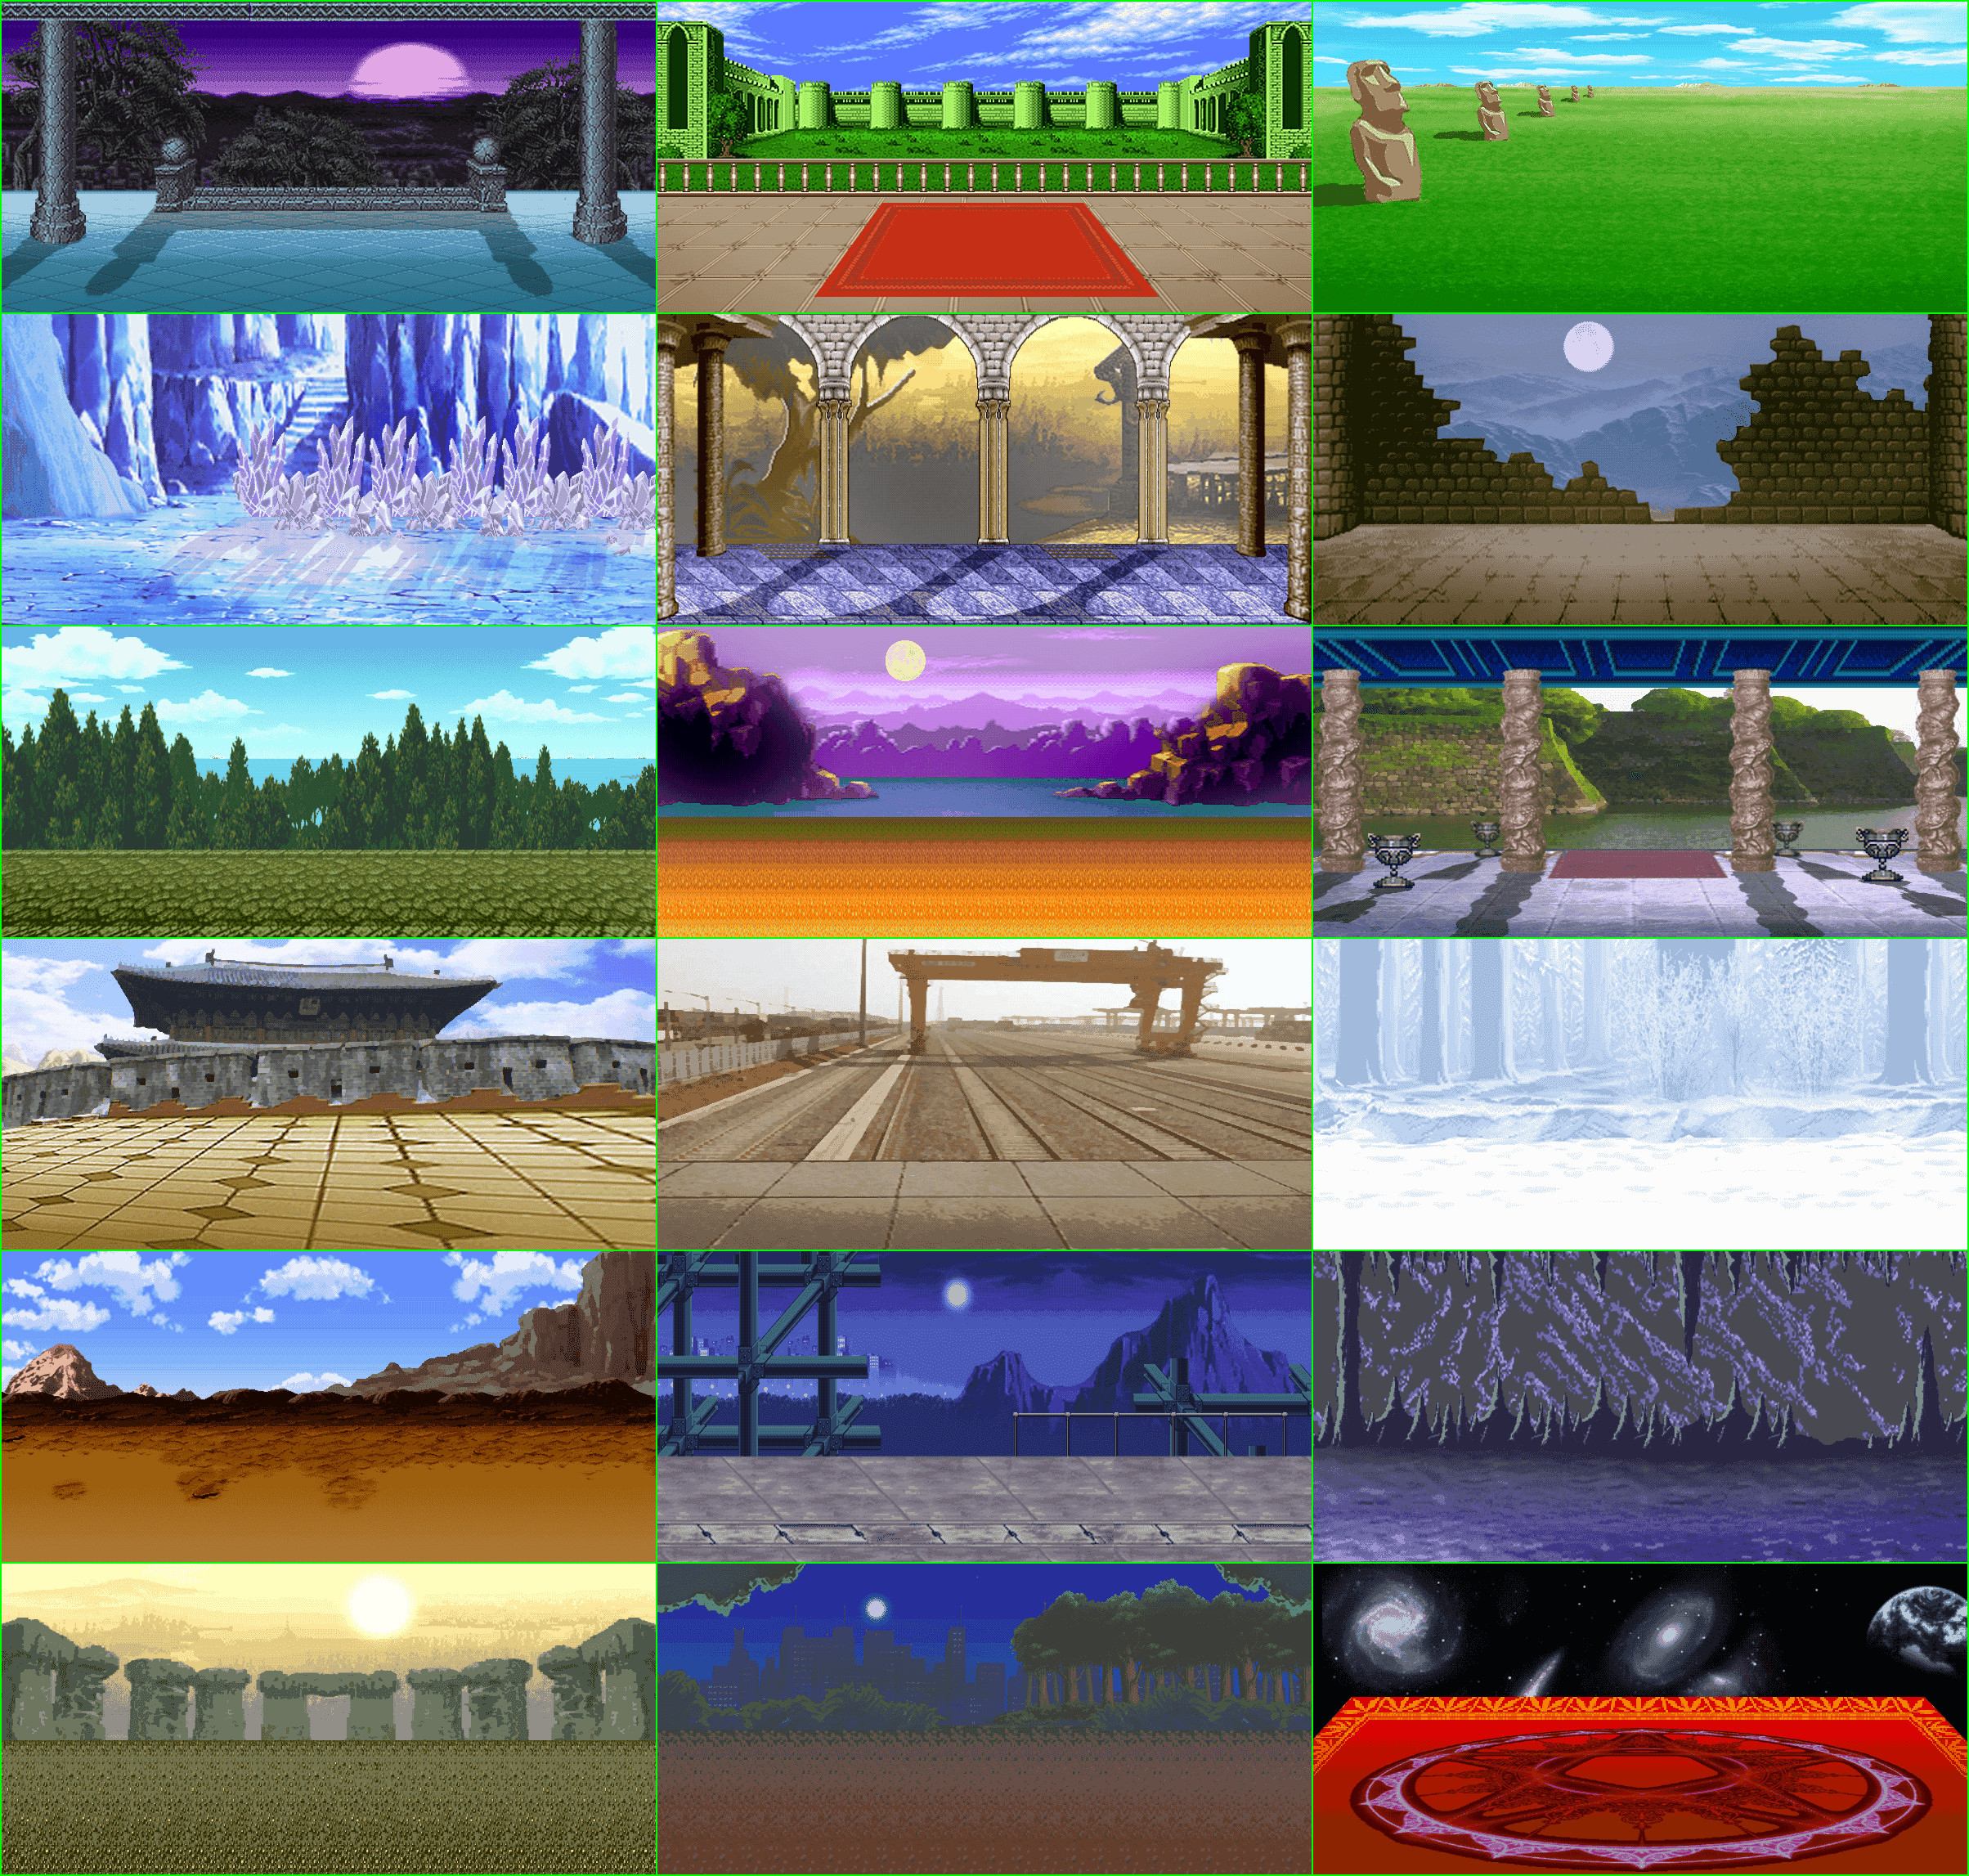 Mighty Fighter 2 - Vs. Mode Stages (Pre-0.7.6)